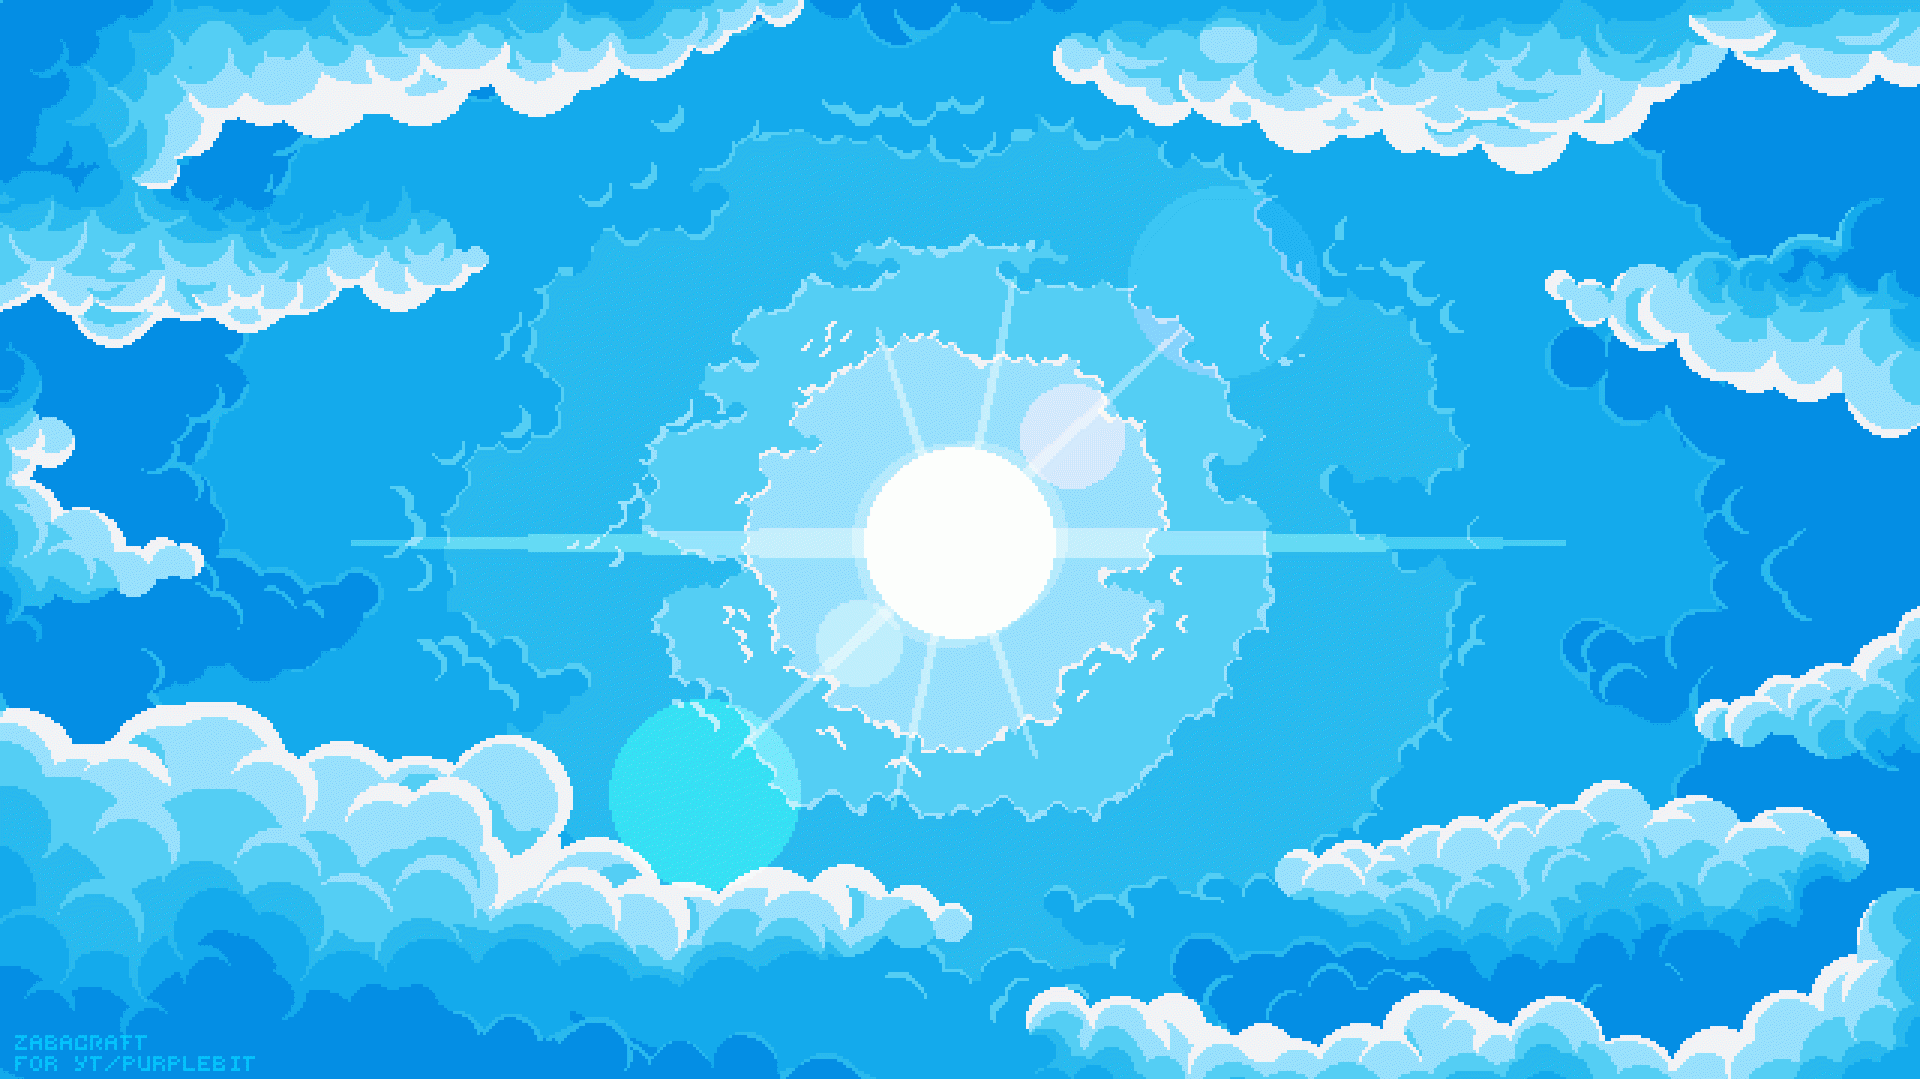 Tunneling Clouds Had A Lot Of Fun Making The In